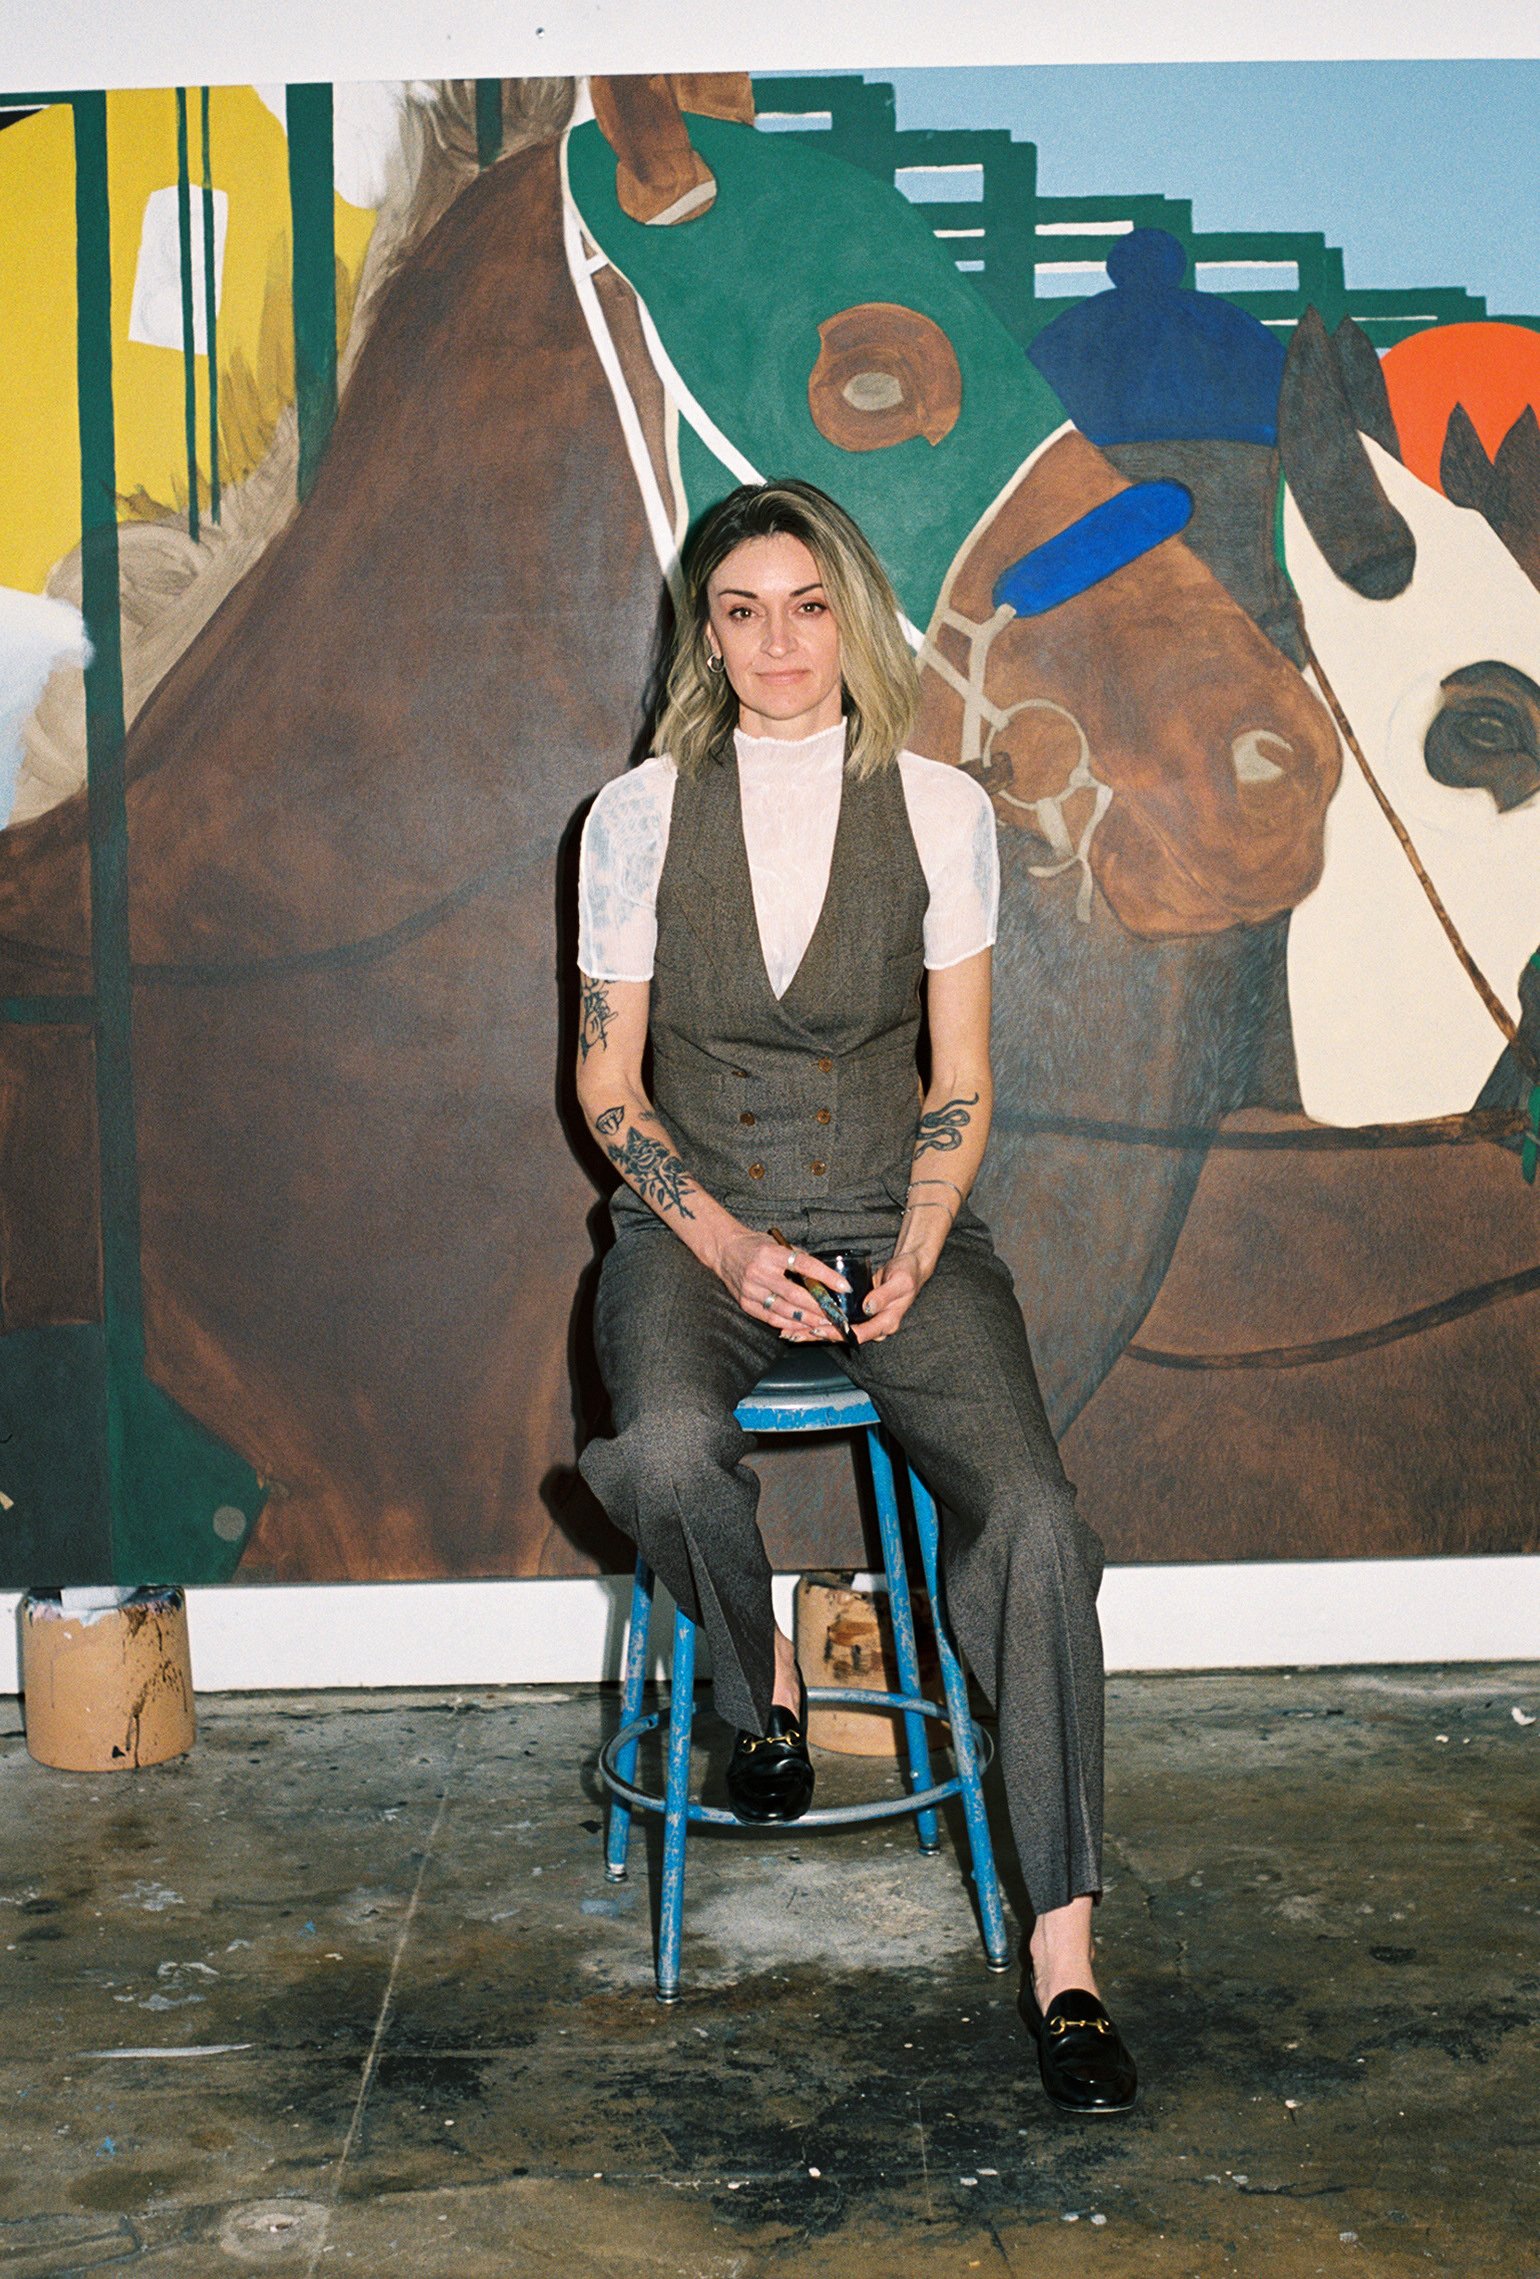 I Hope the Kink Comes Through Up-and-Coming Artist Sarah Miska on Painting the Sensuality of Equestrian Sports